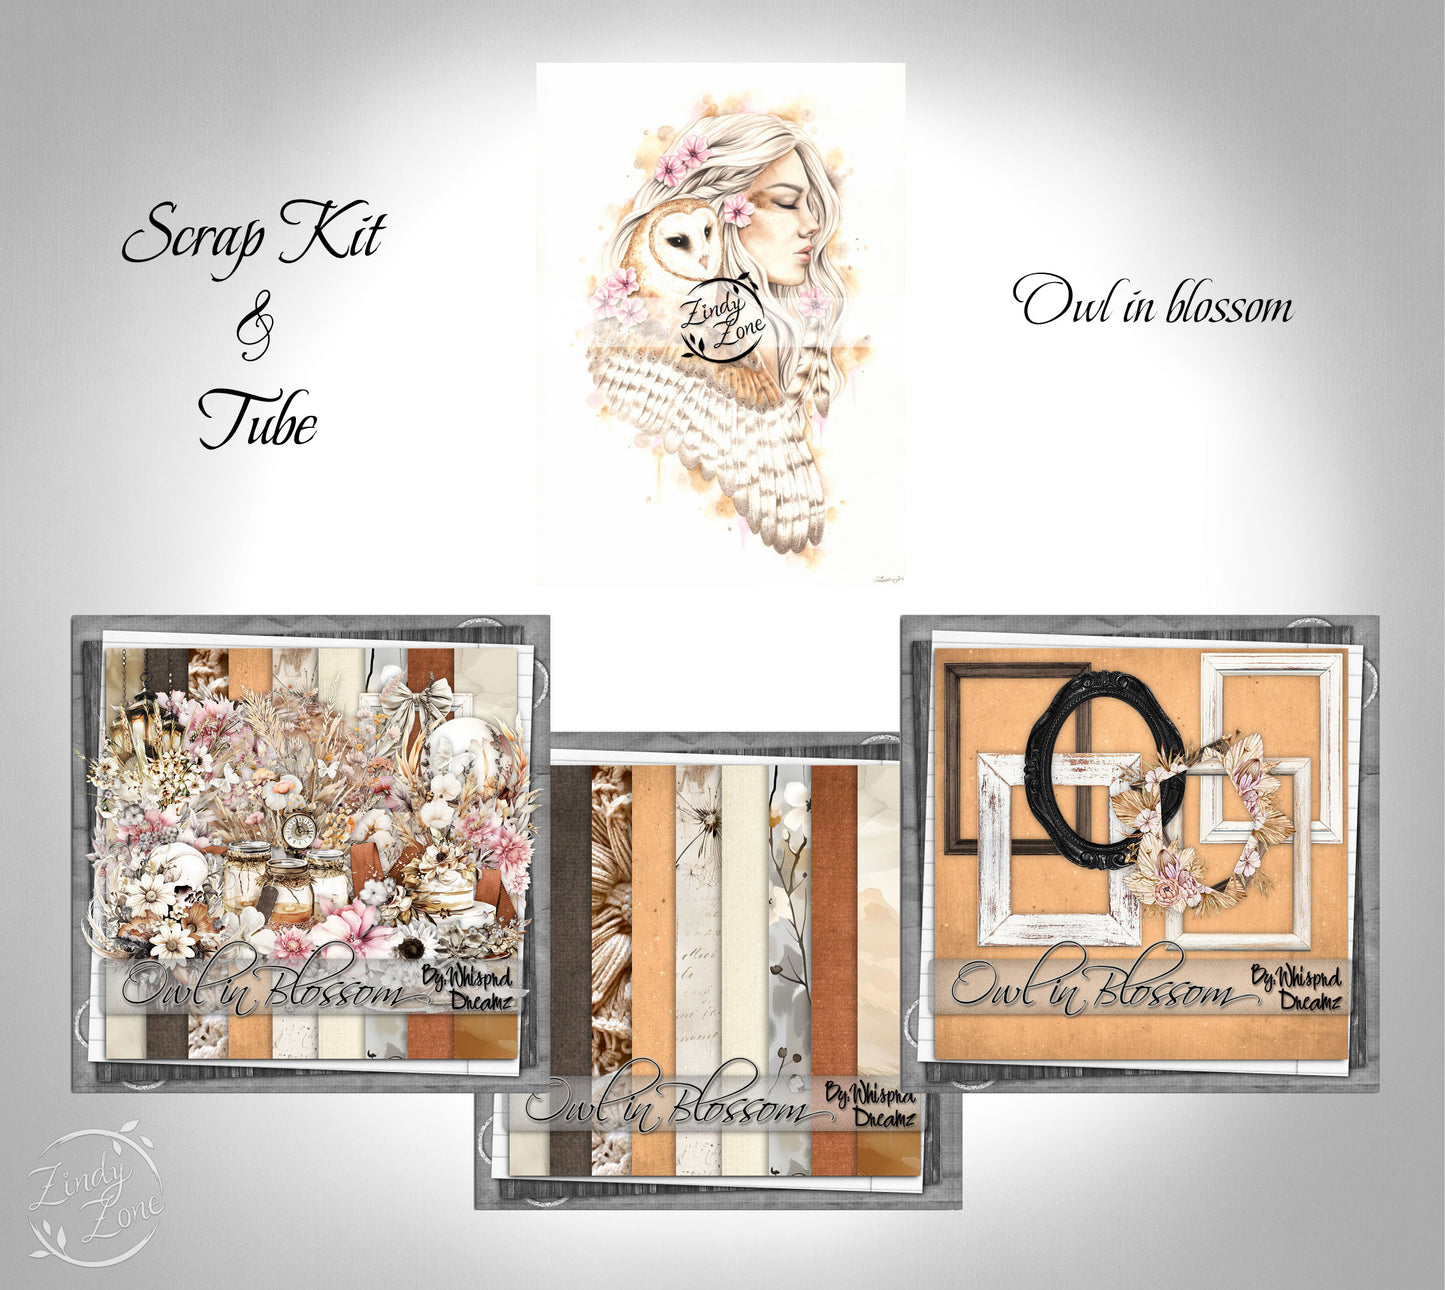 Owl in blossom - Scrap Kit and Tube Pack